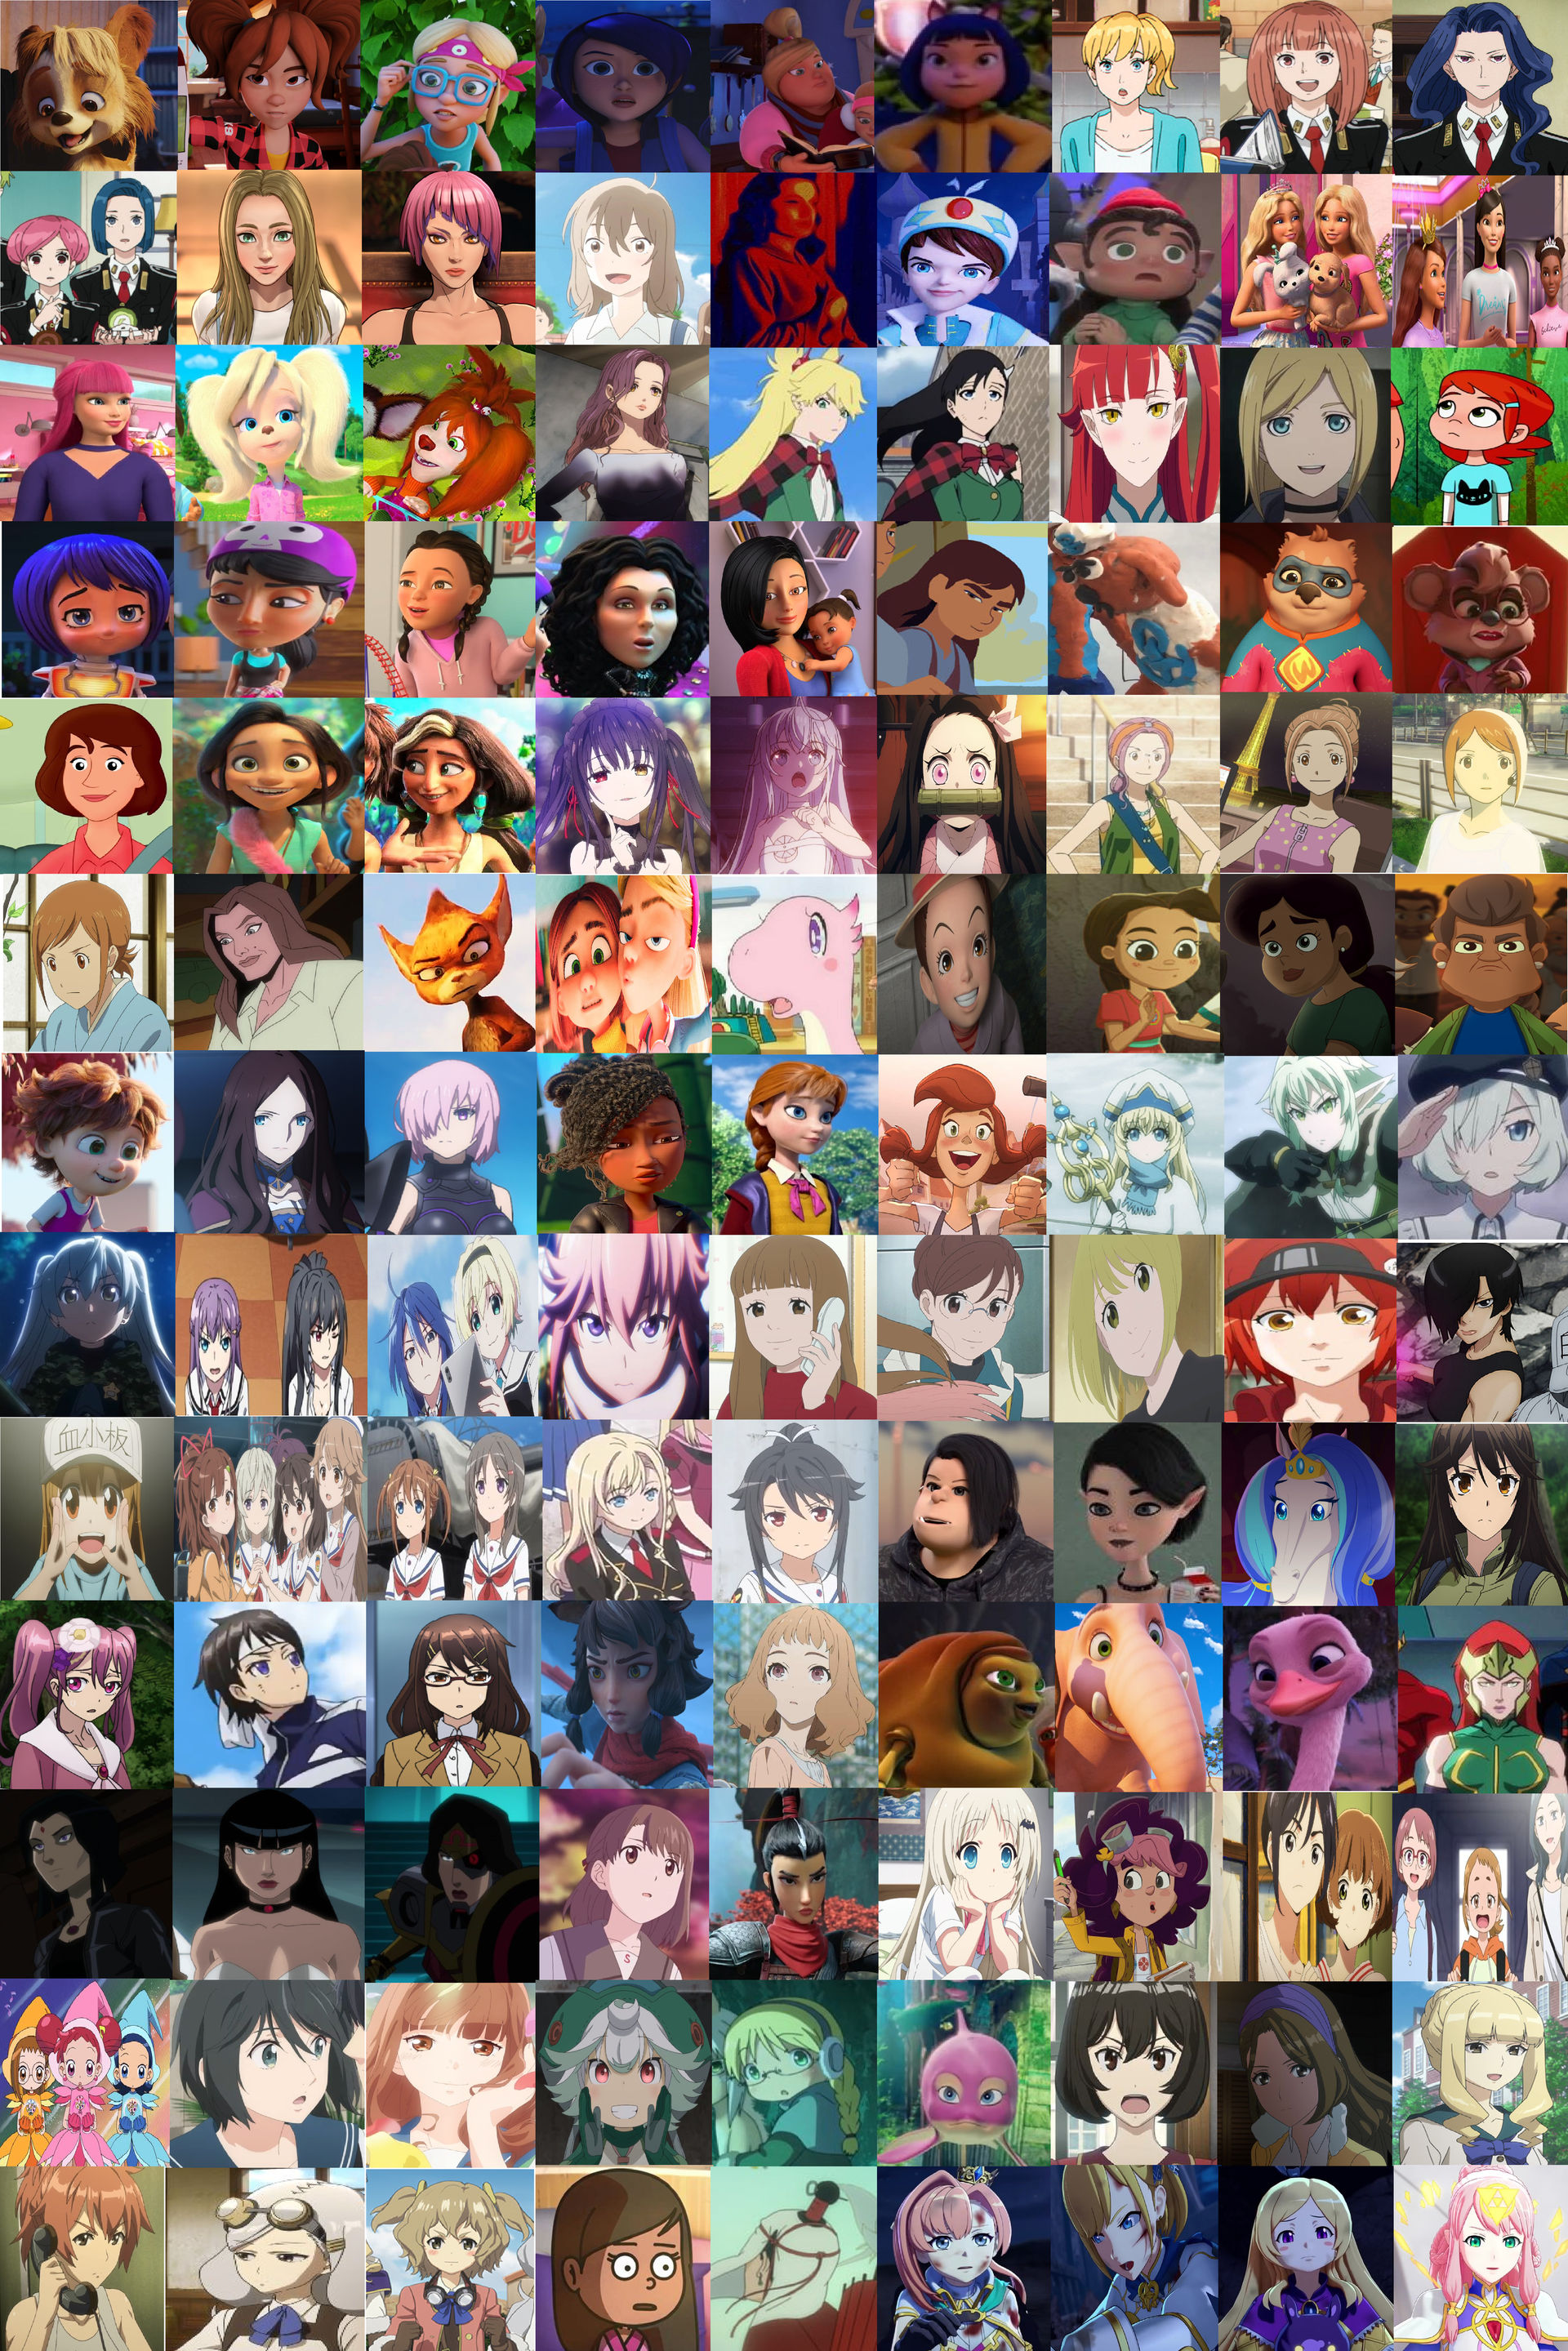 Animated Heroines 21 by Blossomgutz on DeviantArt